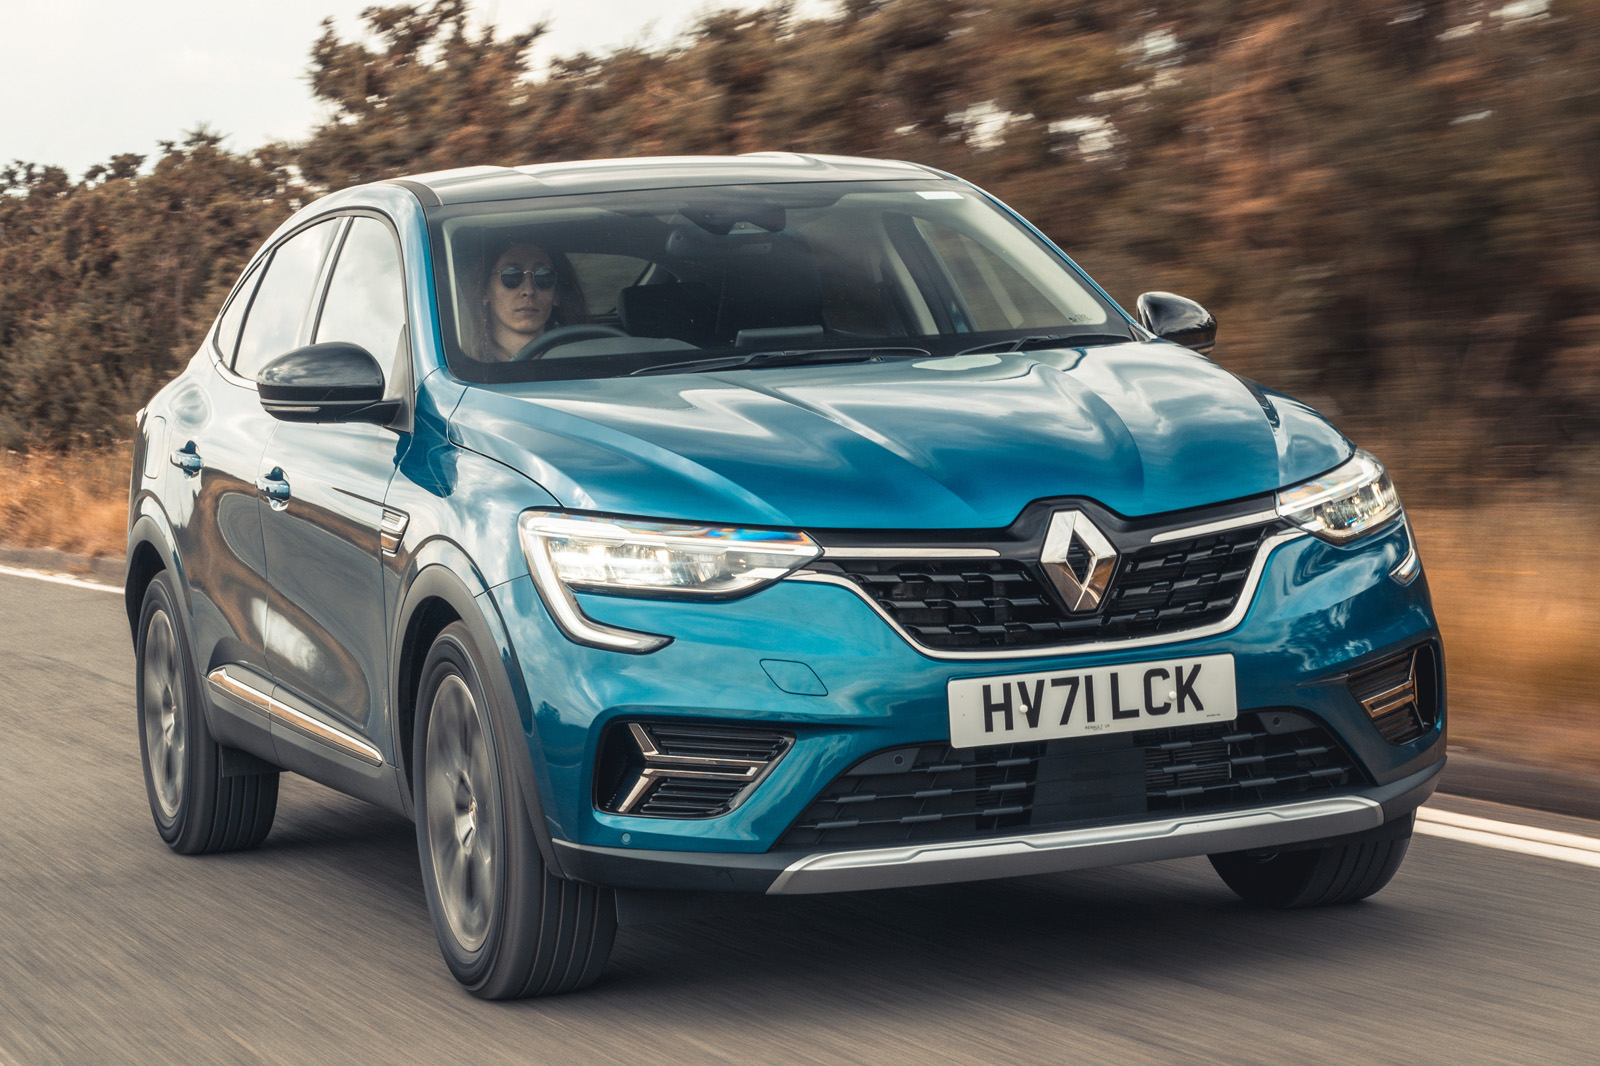 Renault Austral Lands In Europe With Hybrid Tech, Massive Dual Screen